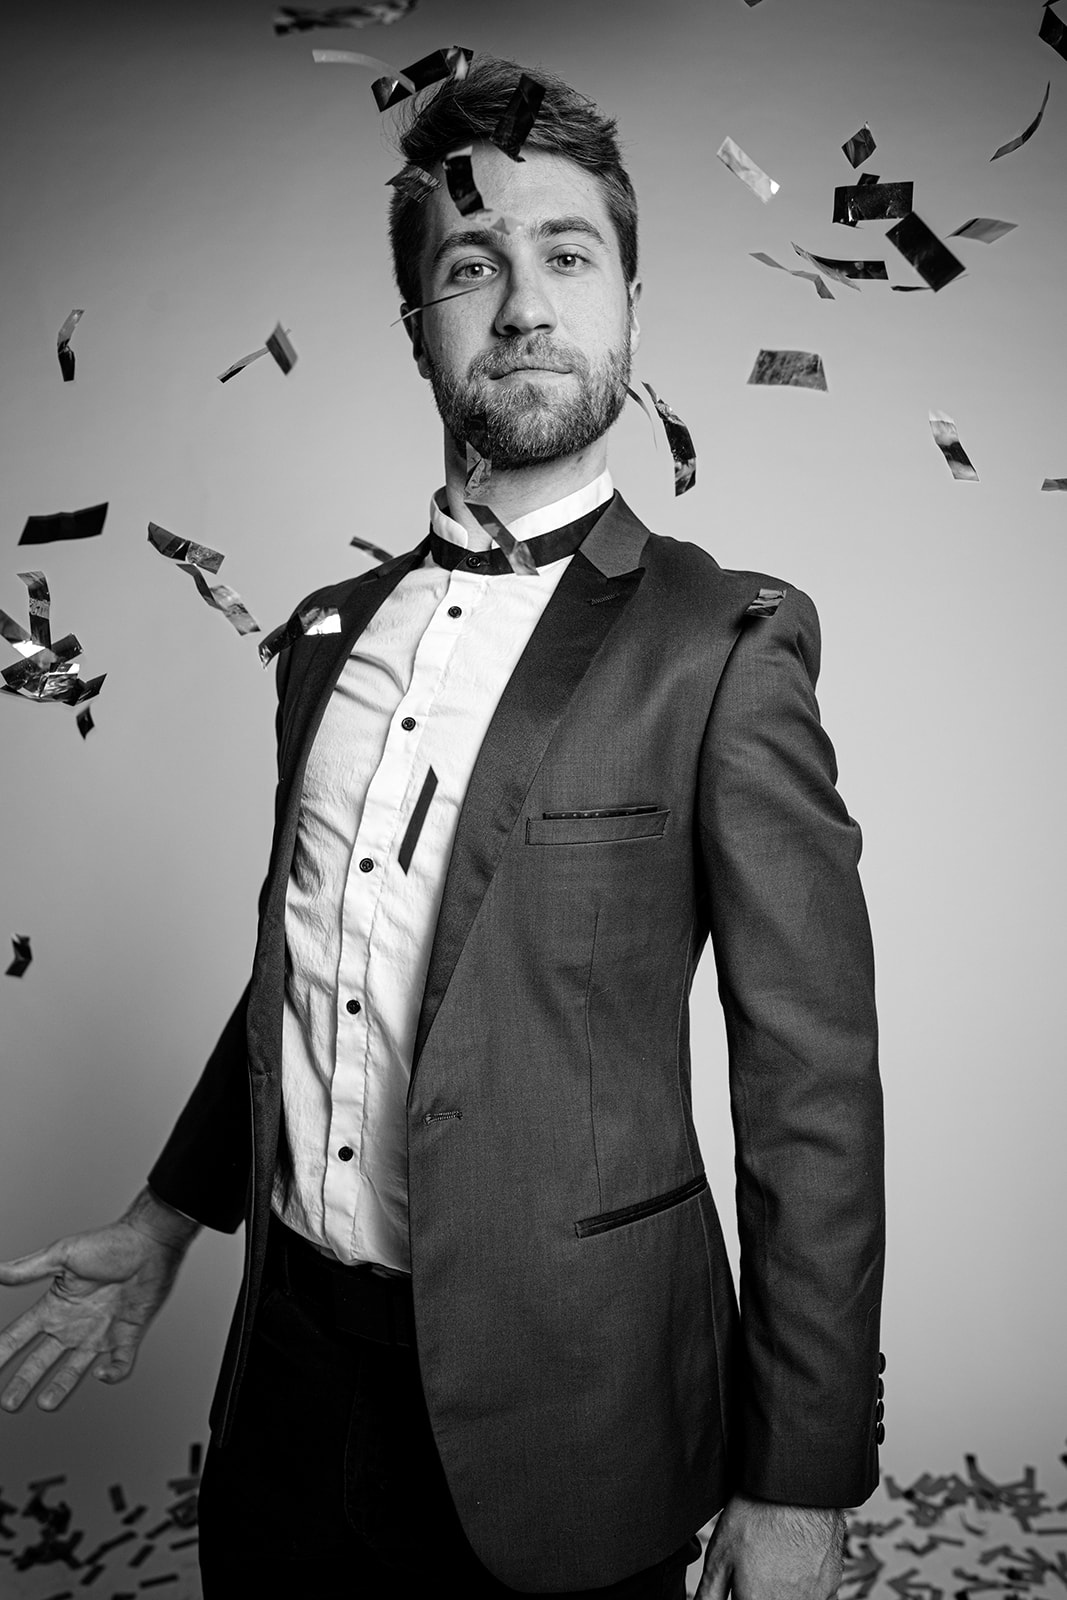 A man stands before the photobooth. Confetti falls in front of him.